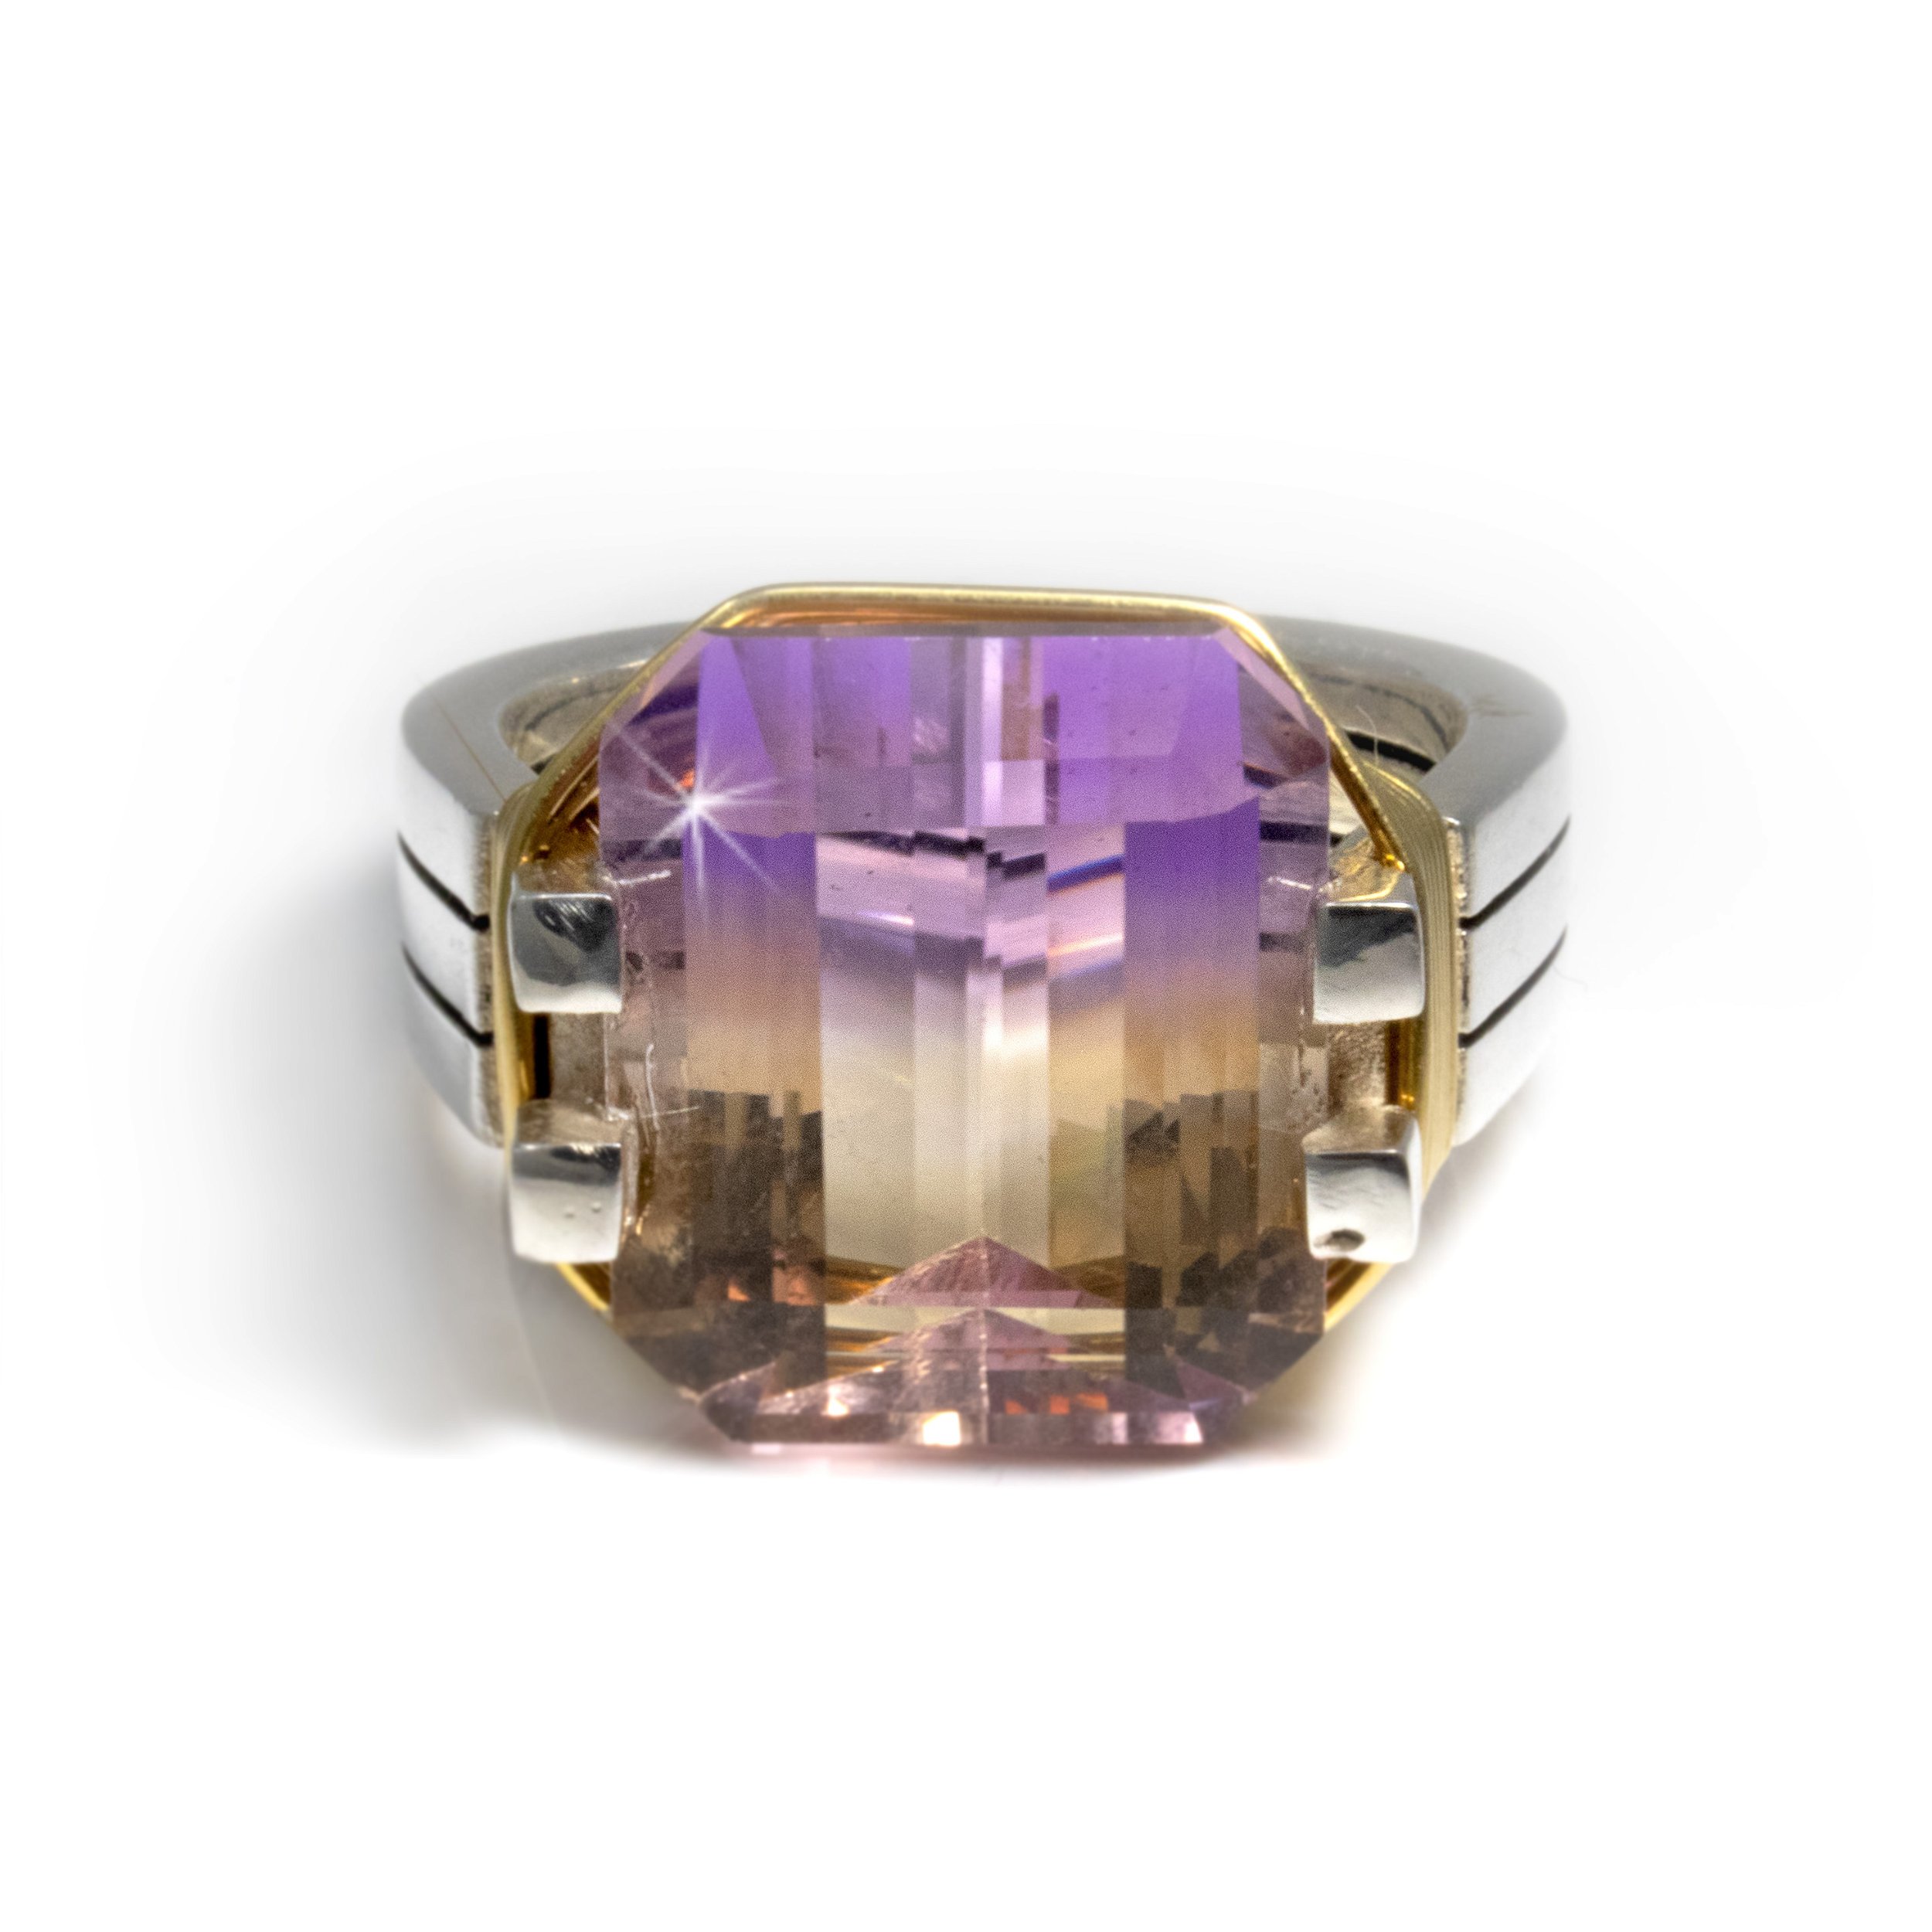 Ametrine Ring - Emerald Cut Ametrine Prong Set In Sleek Industrial Design Band With Gold Vermeil Wire Wrap Size 7